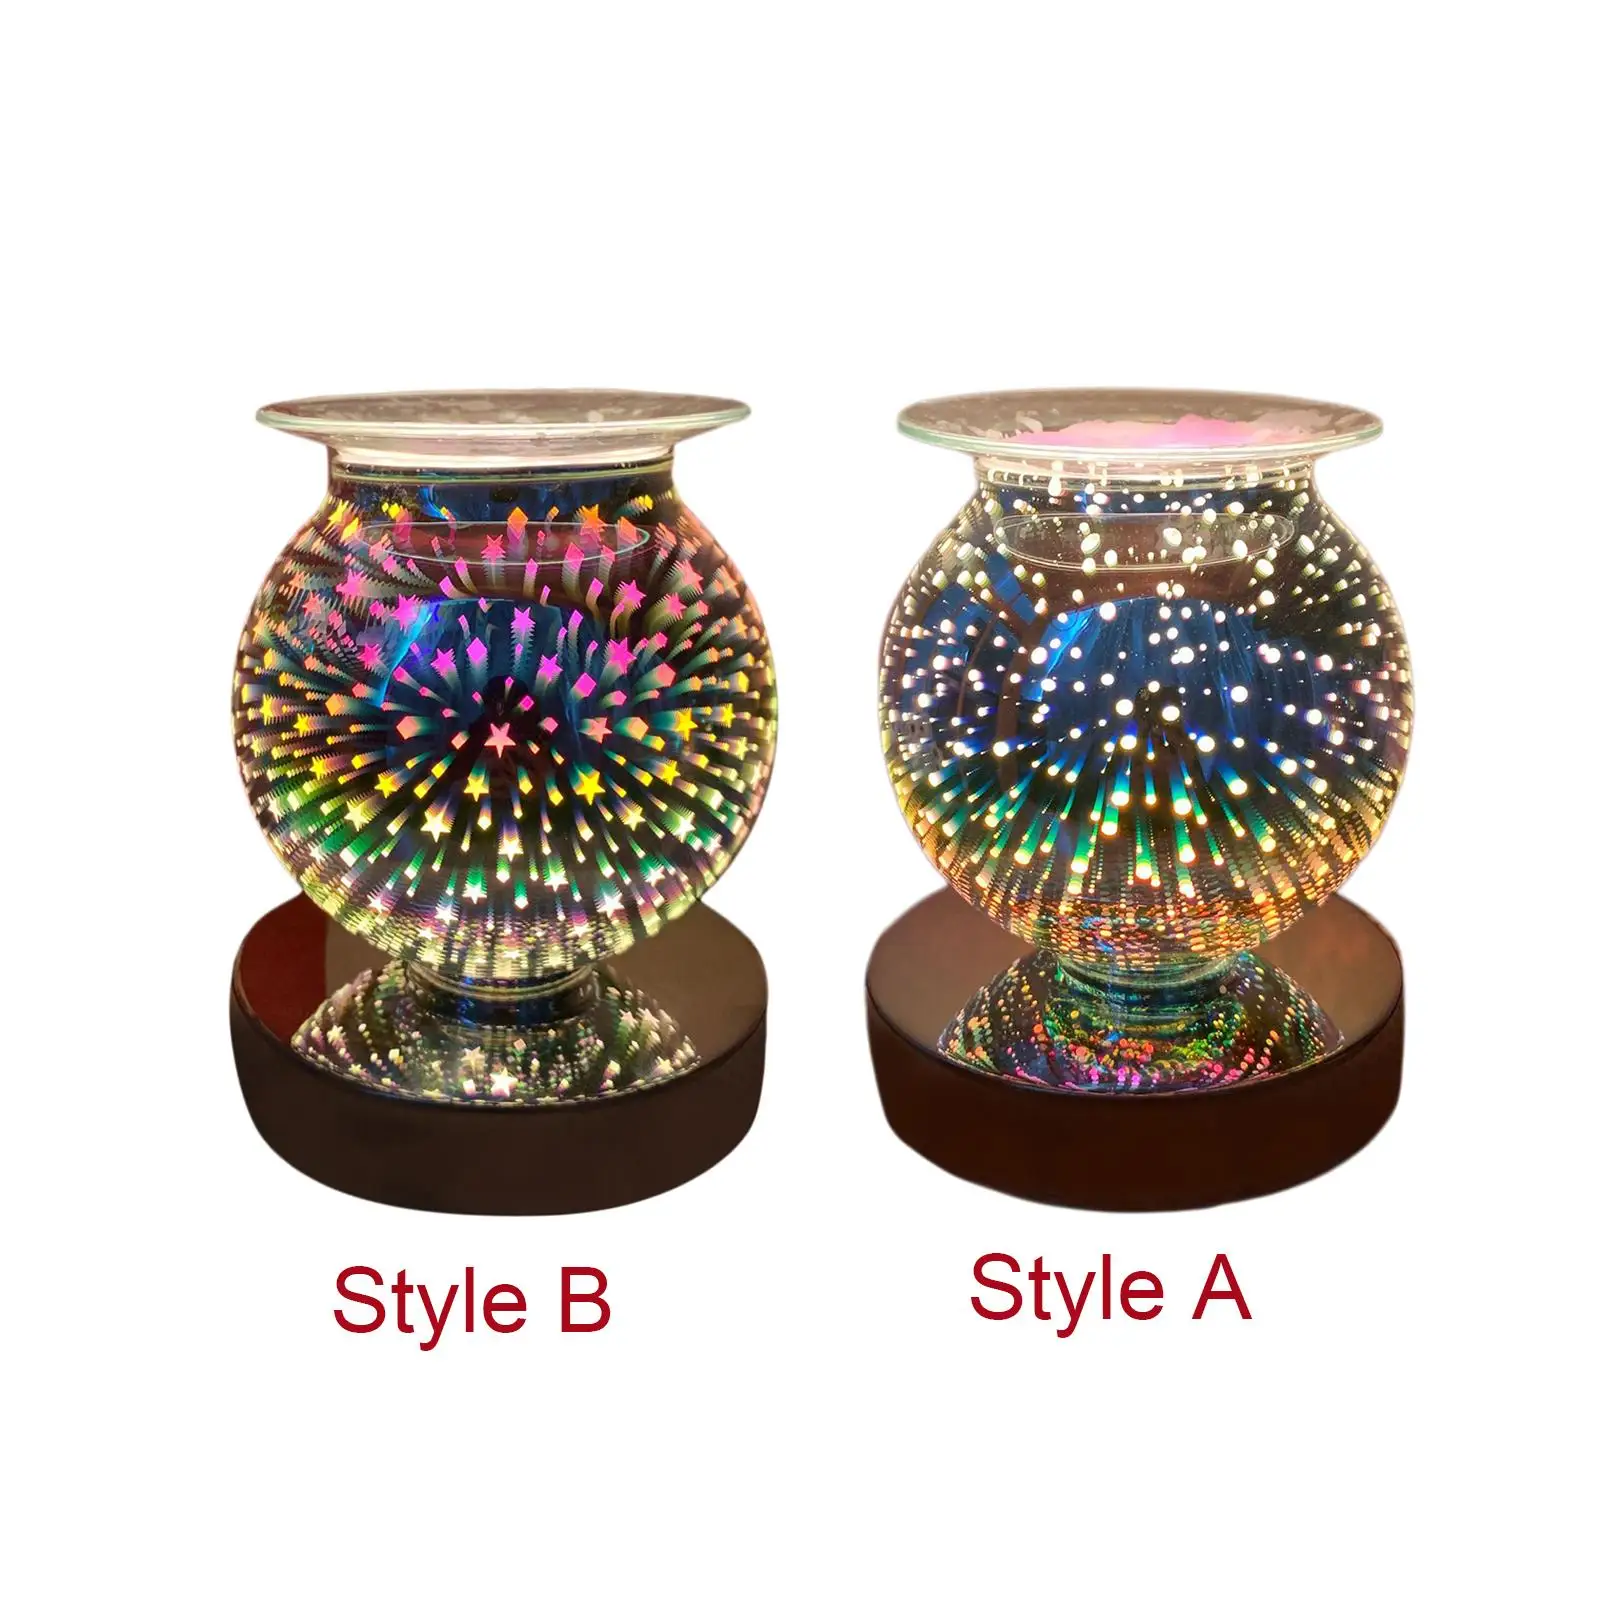 Electric Wax Melt Warmer Dimmable Decorative Wax Burner Fragrance Night Light Lamp for Living Room Office Bedroom Spa Decor